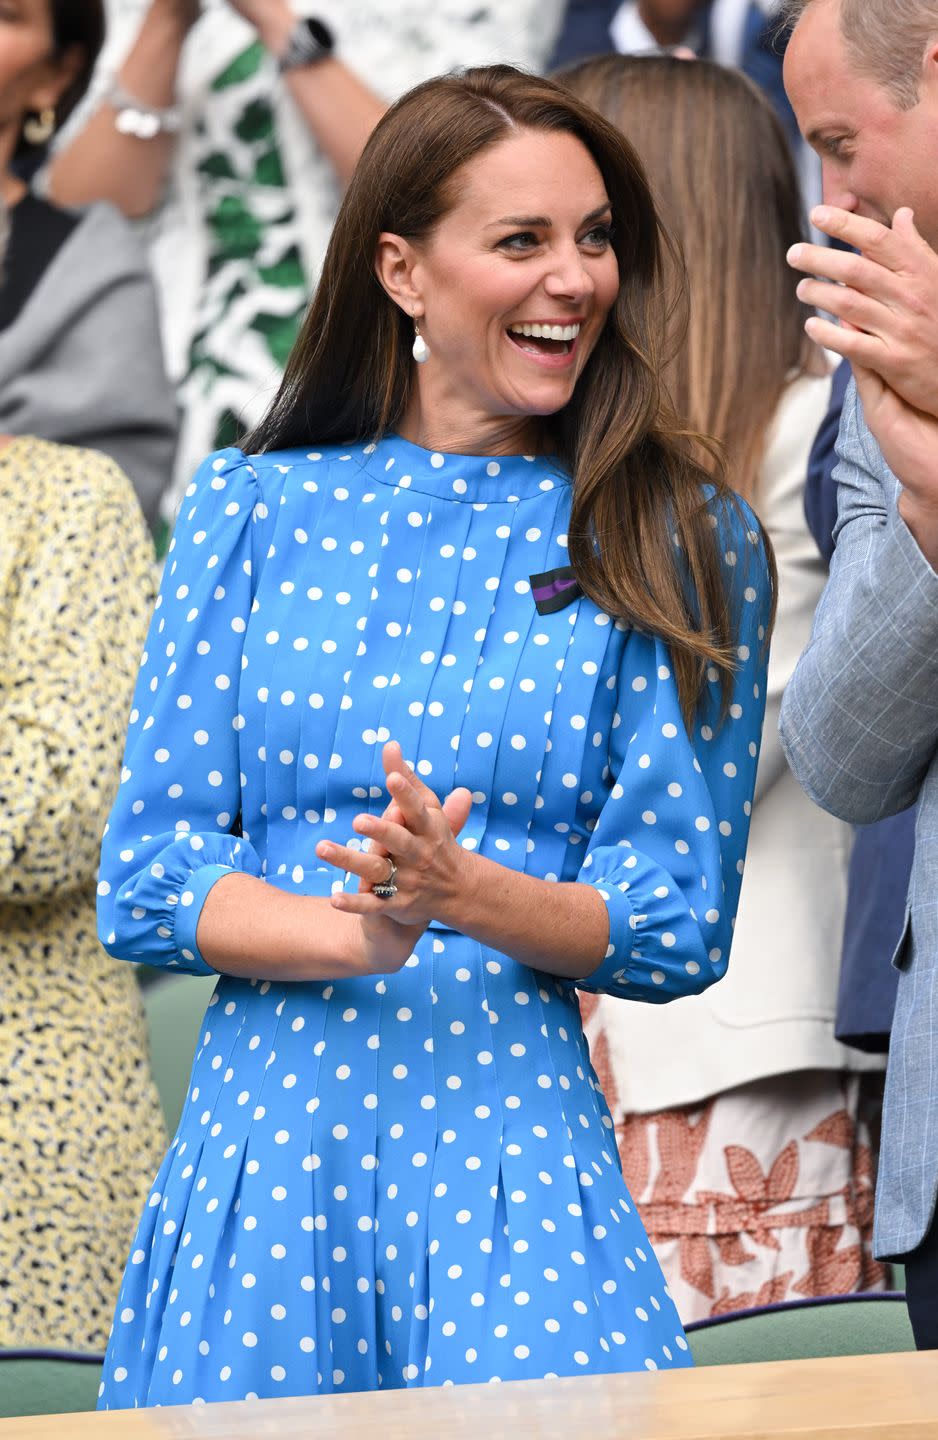 london, england july 05 catherine, duchess of cambridge attends day 9 of the wimbledon tennis championships with prince william, duke of cambridge at all england lawn tennis and croquet club on july 05, 2022 in london, england photo by karwai tangwireimage